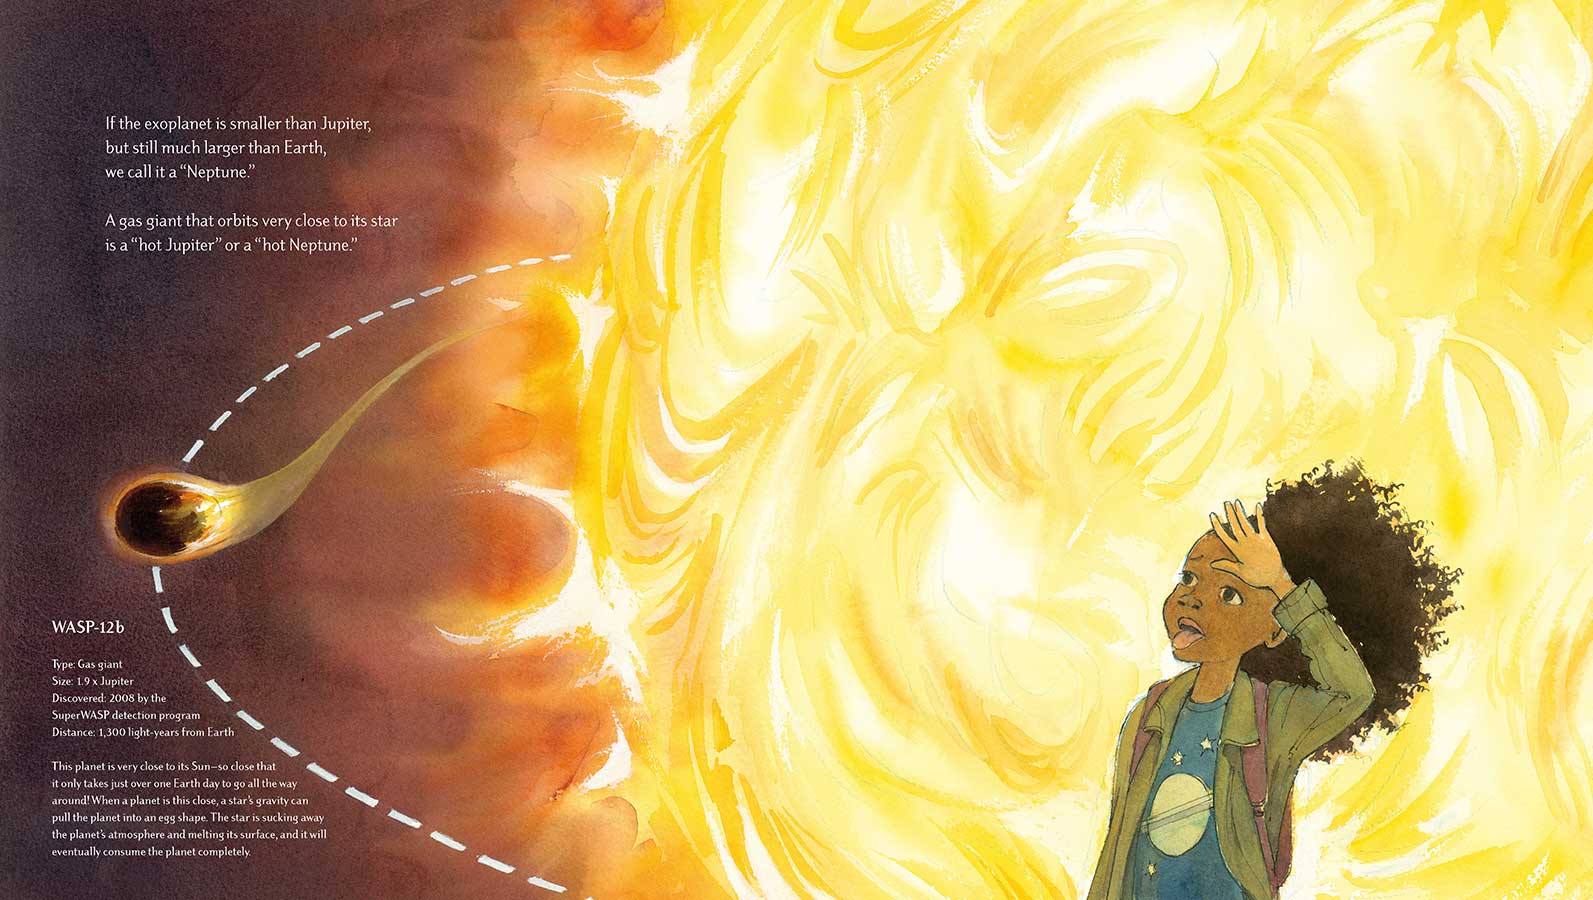 Watercolor illustration from 'Just Right' showing a hot sun with a planet orbiting very close by. In the foreground stands a girl who is indicating that she is very, very hot.